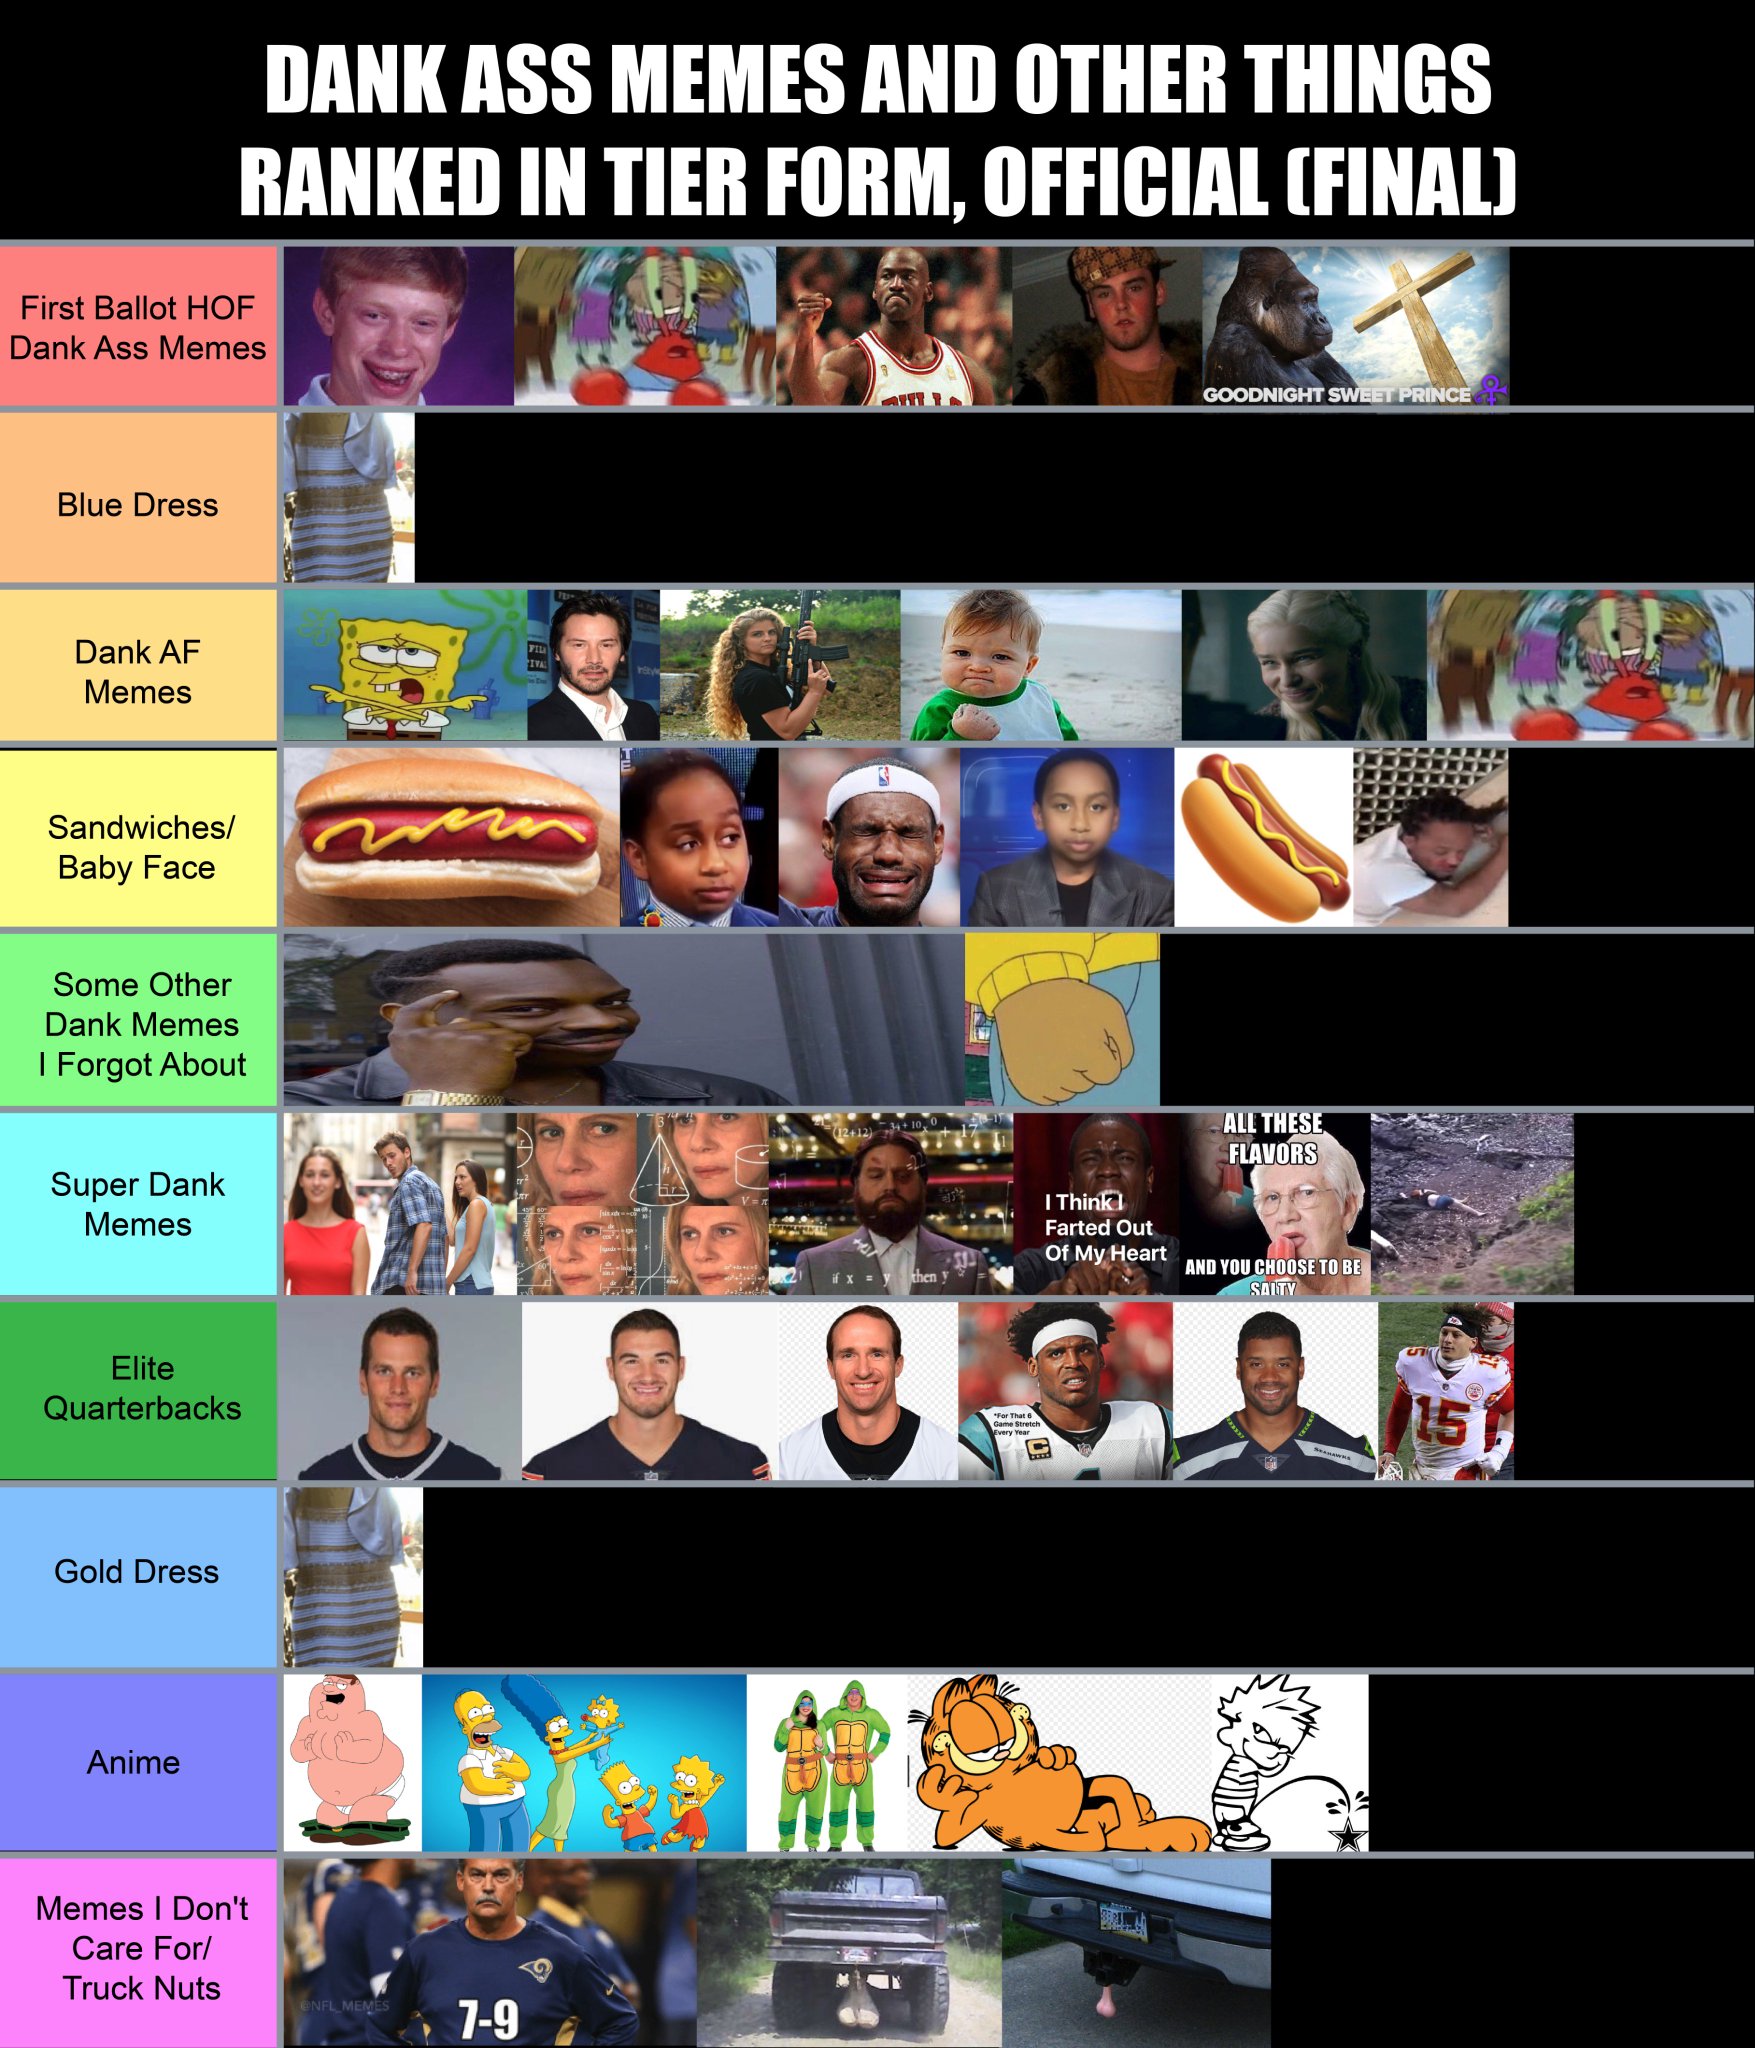 B1g Cat Dank Ass Memes Other Things Ranked In Tier Form Official Final